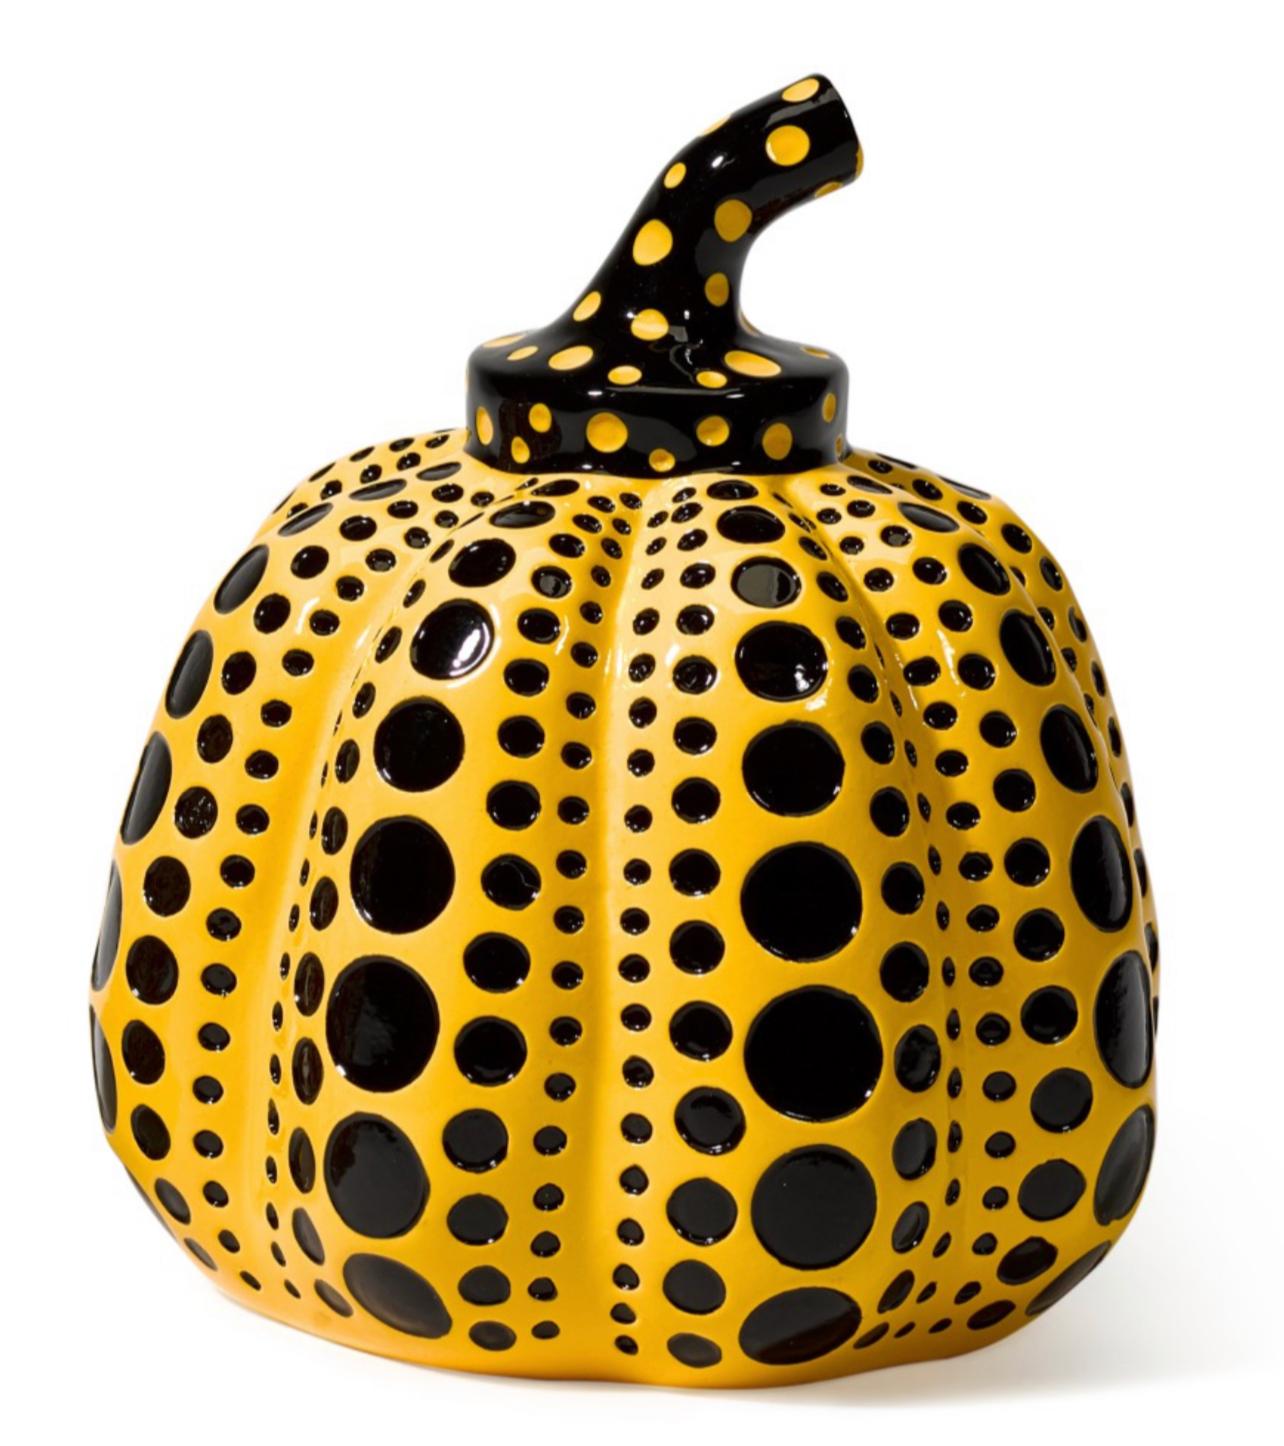 YAYOI KUSAMA (1929 - ) Artist and writer known for exploring a variety of media, including painting, sculpture, collage, performance art and environmental installations. She is considered to be one of the most important living artists to come out of